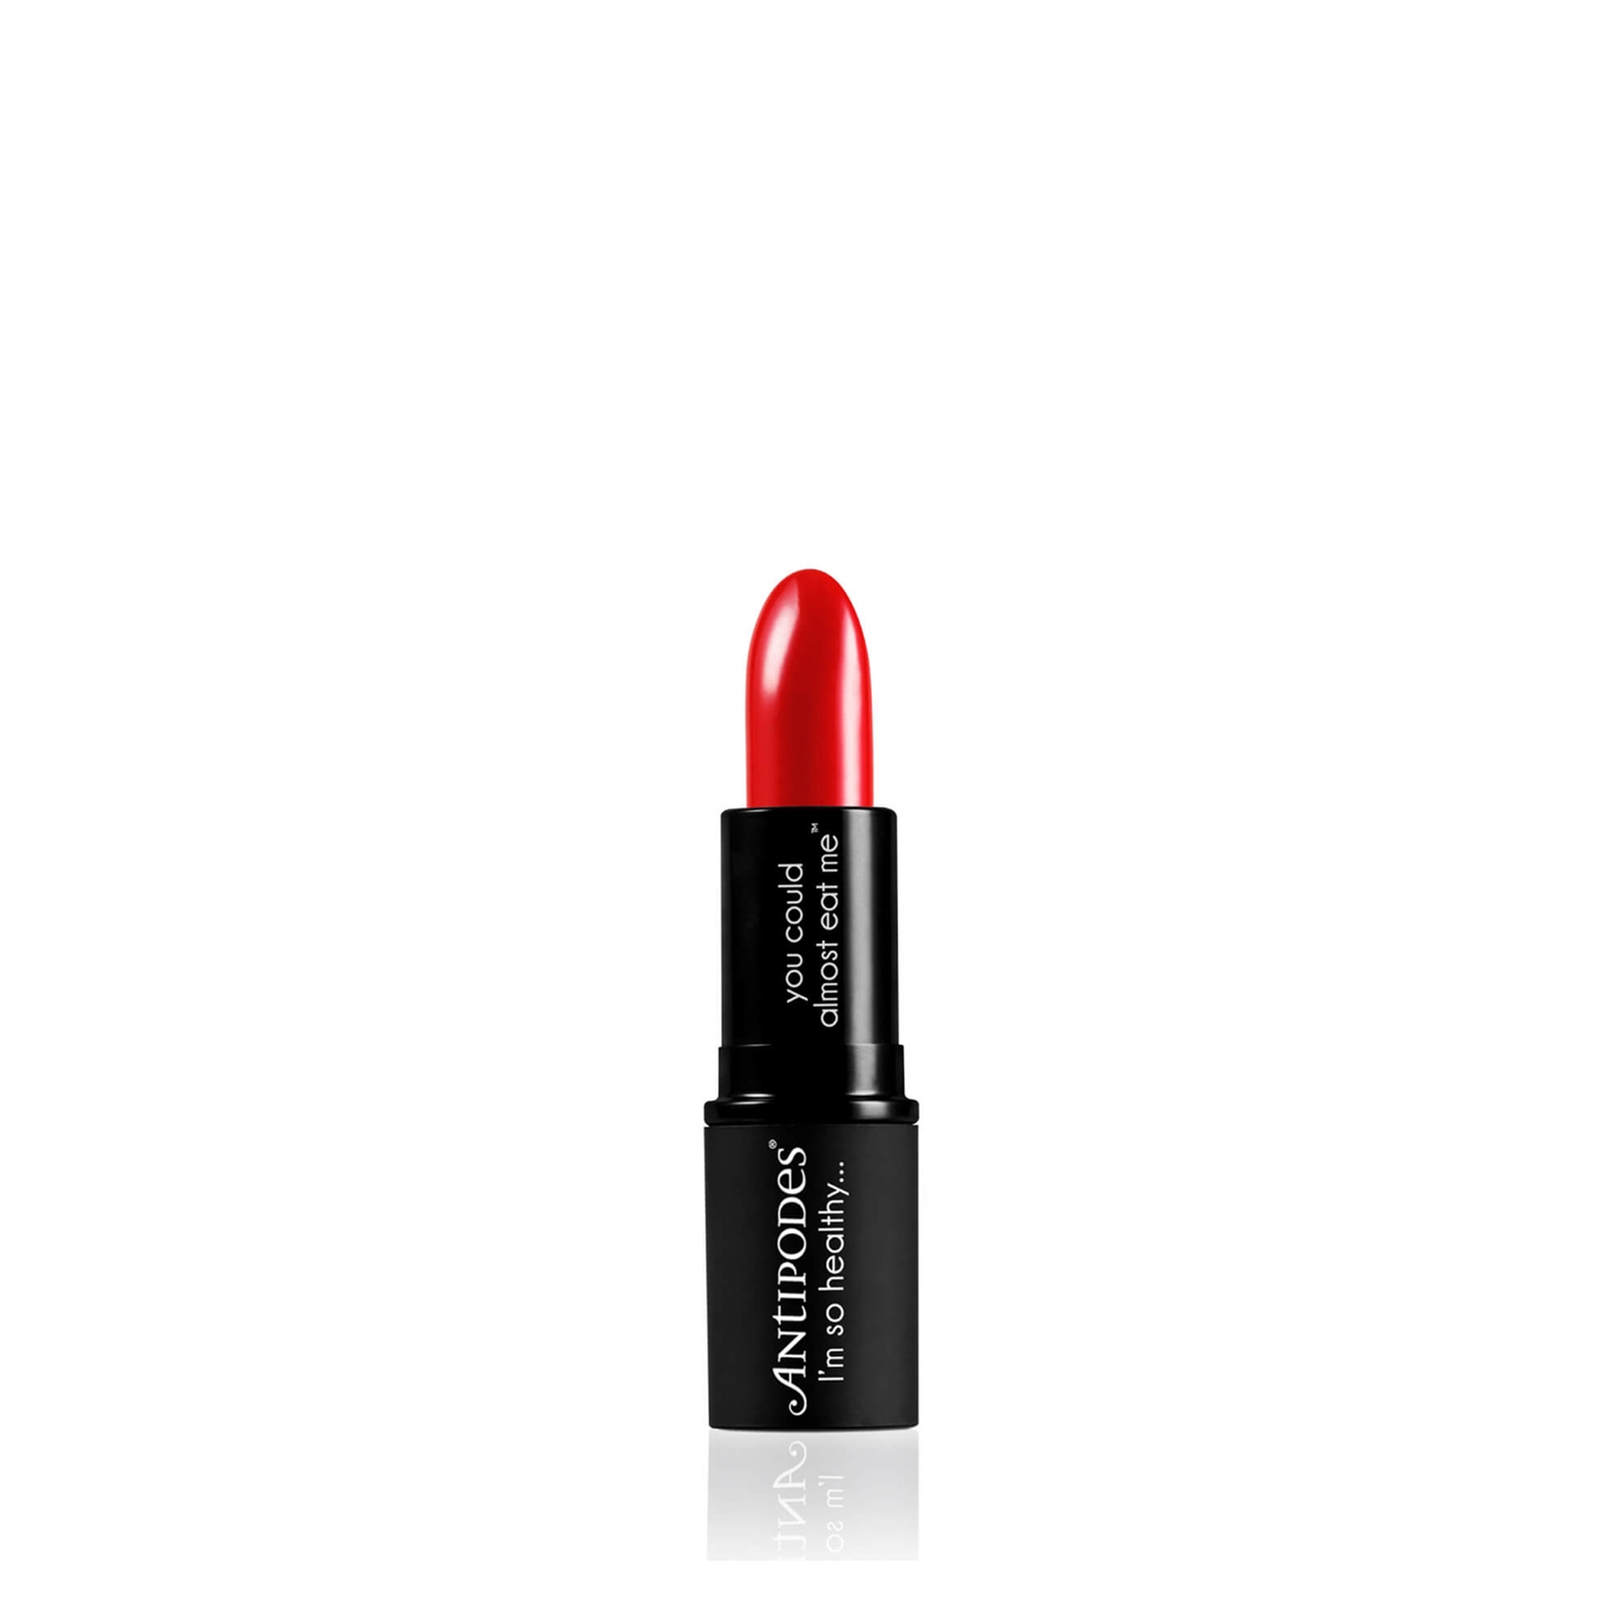 Forest Berry Red Lipstick 4g